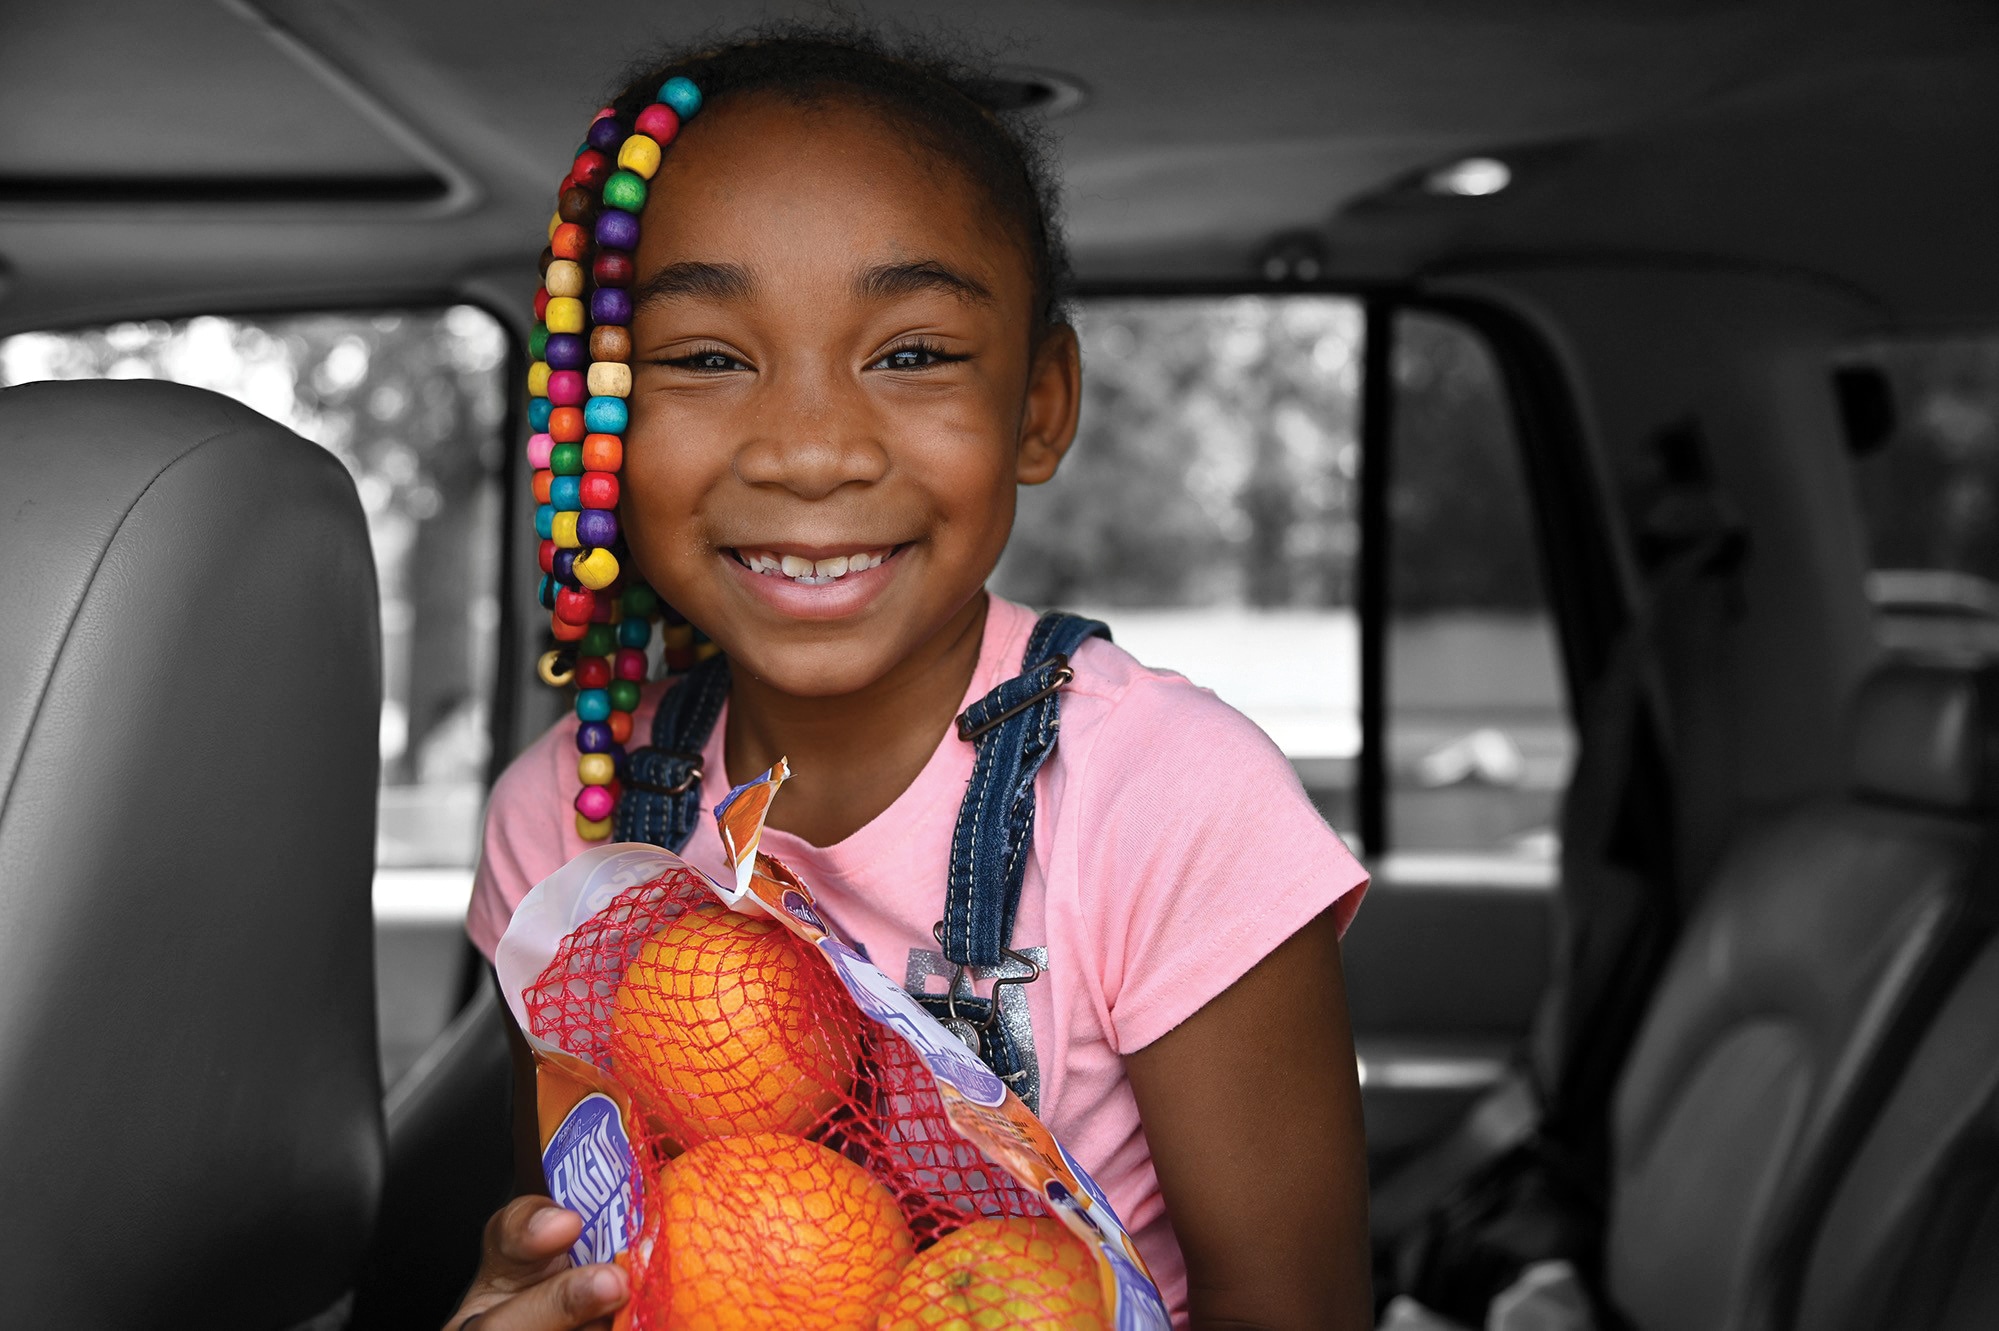 Young girl sitting in a car holding a bag of oranges